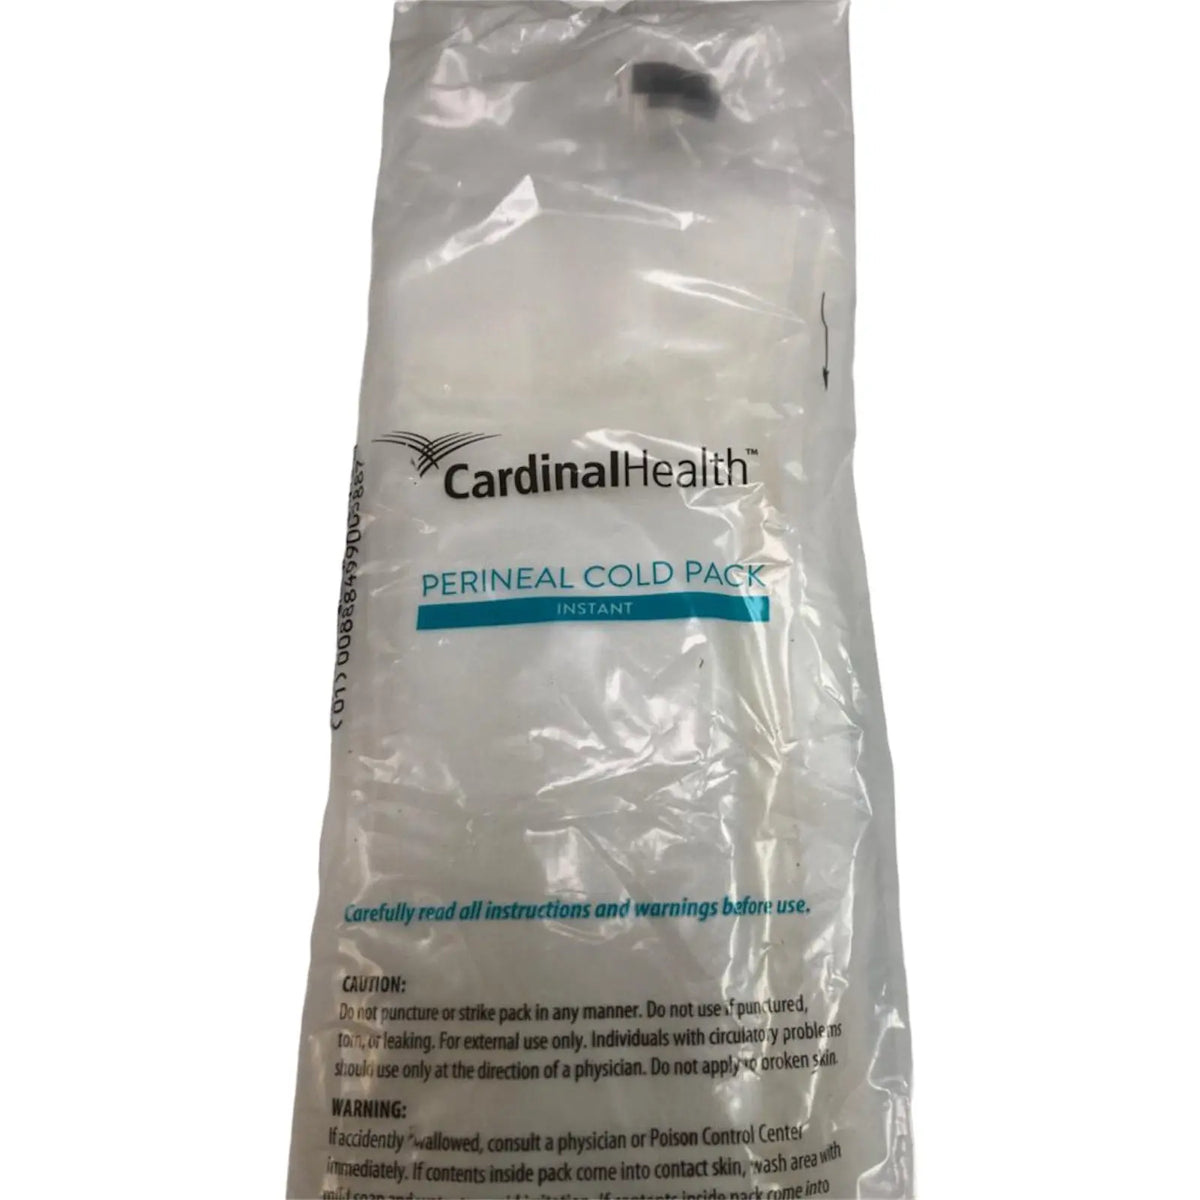 Cardinal Health 11500-010 Perineal Cold Pack Instant, 23 Count